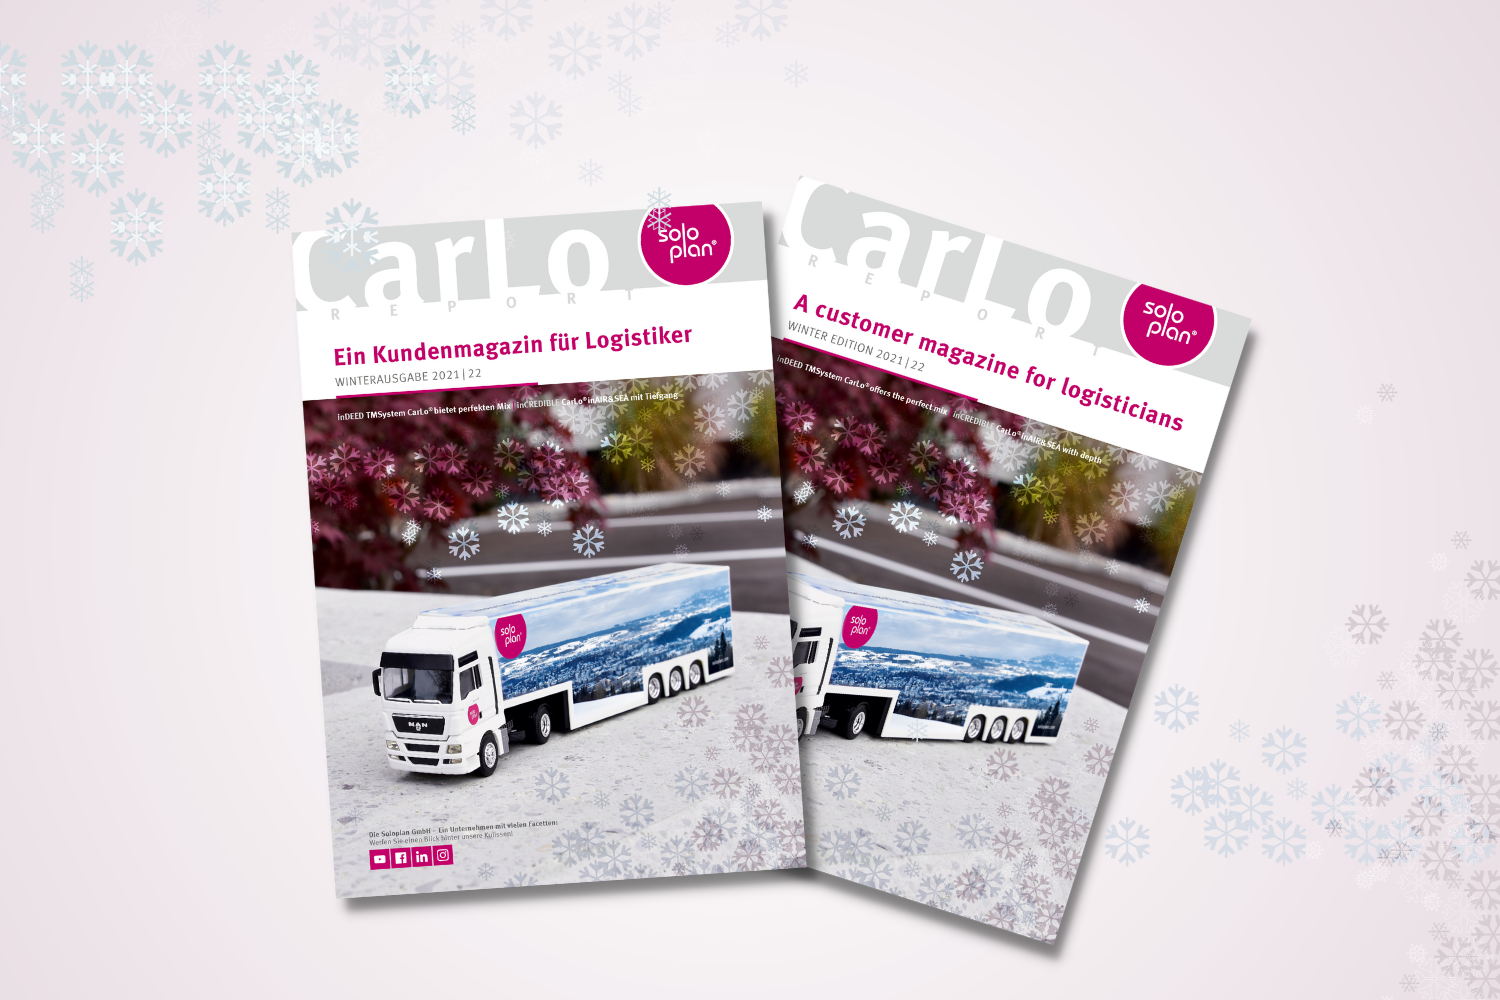 We present: Our new CarLo Report!